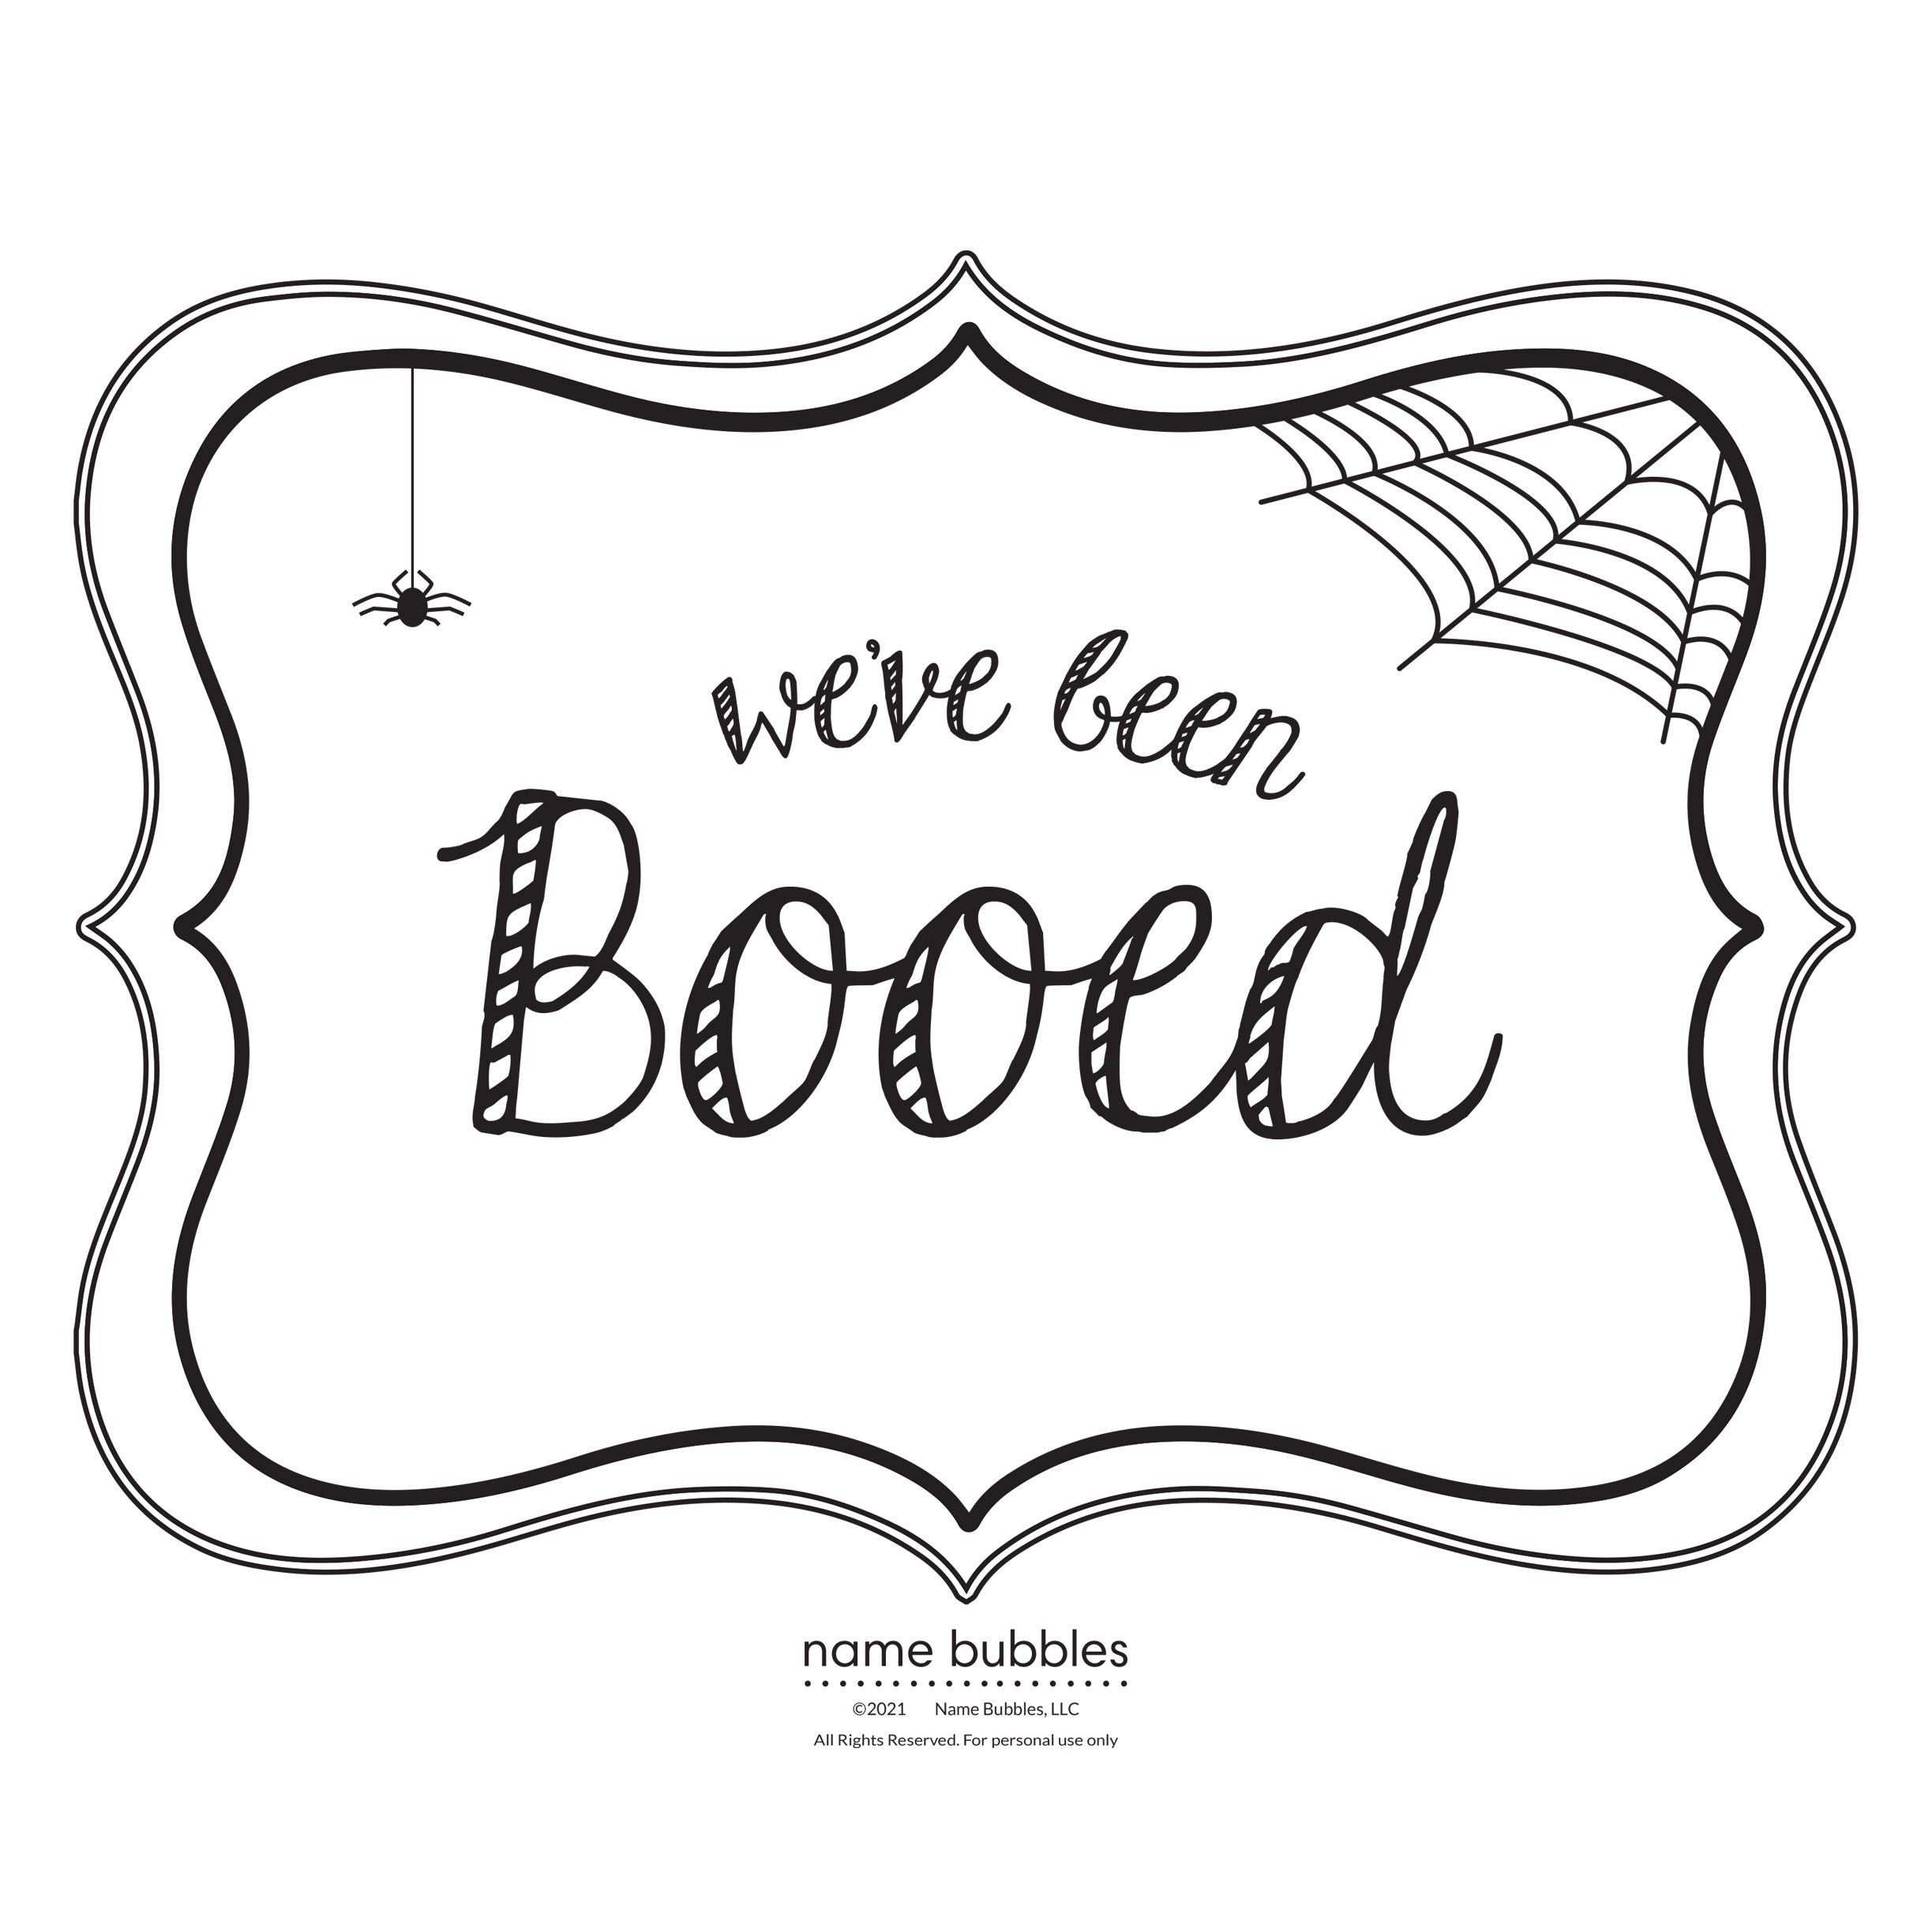 We’ve Been Booed - Name Bubbles Blog Image 